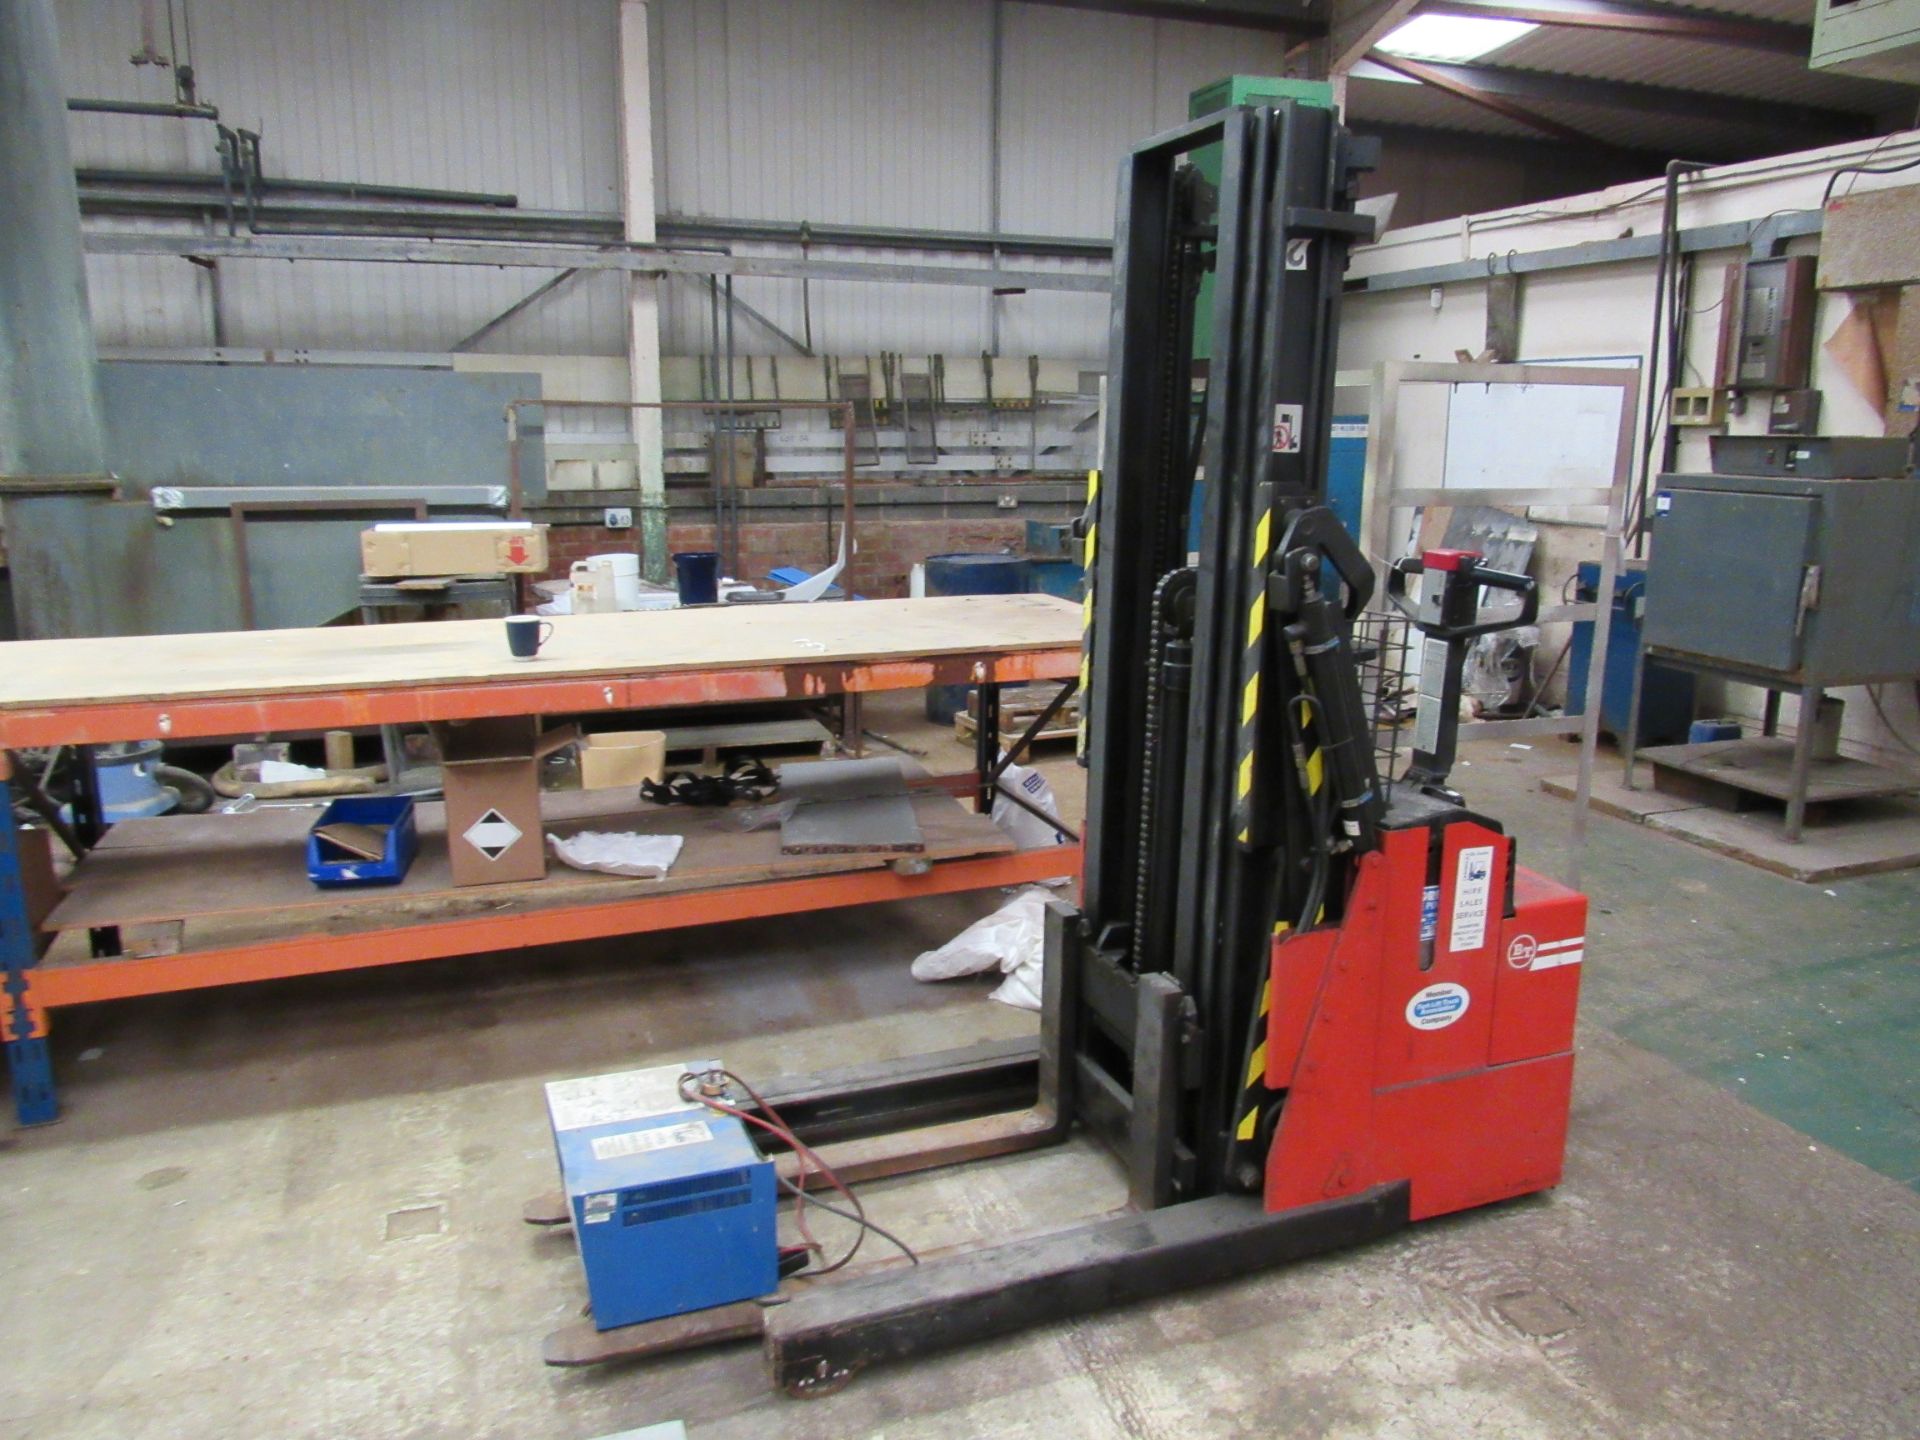 BT LSR 1200/2 1200Kg Electric 3 Axis Stacker Truck with Charger - Located on the first floor. The